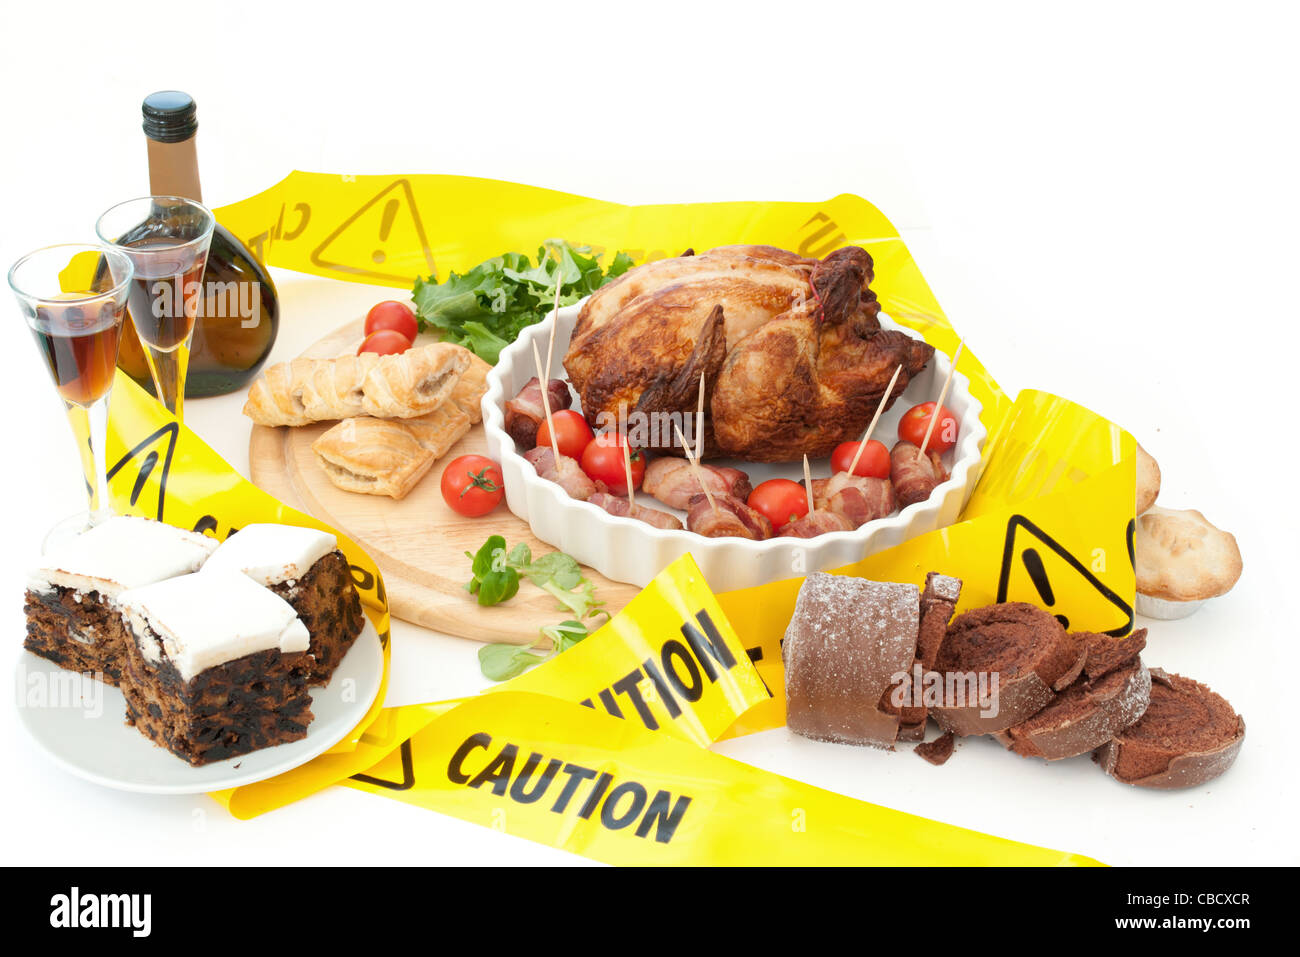 Caution warning tape around typical christmas foods Stock Photo